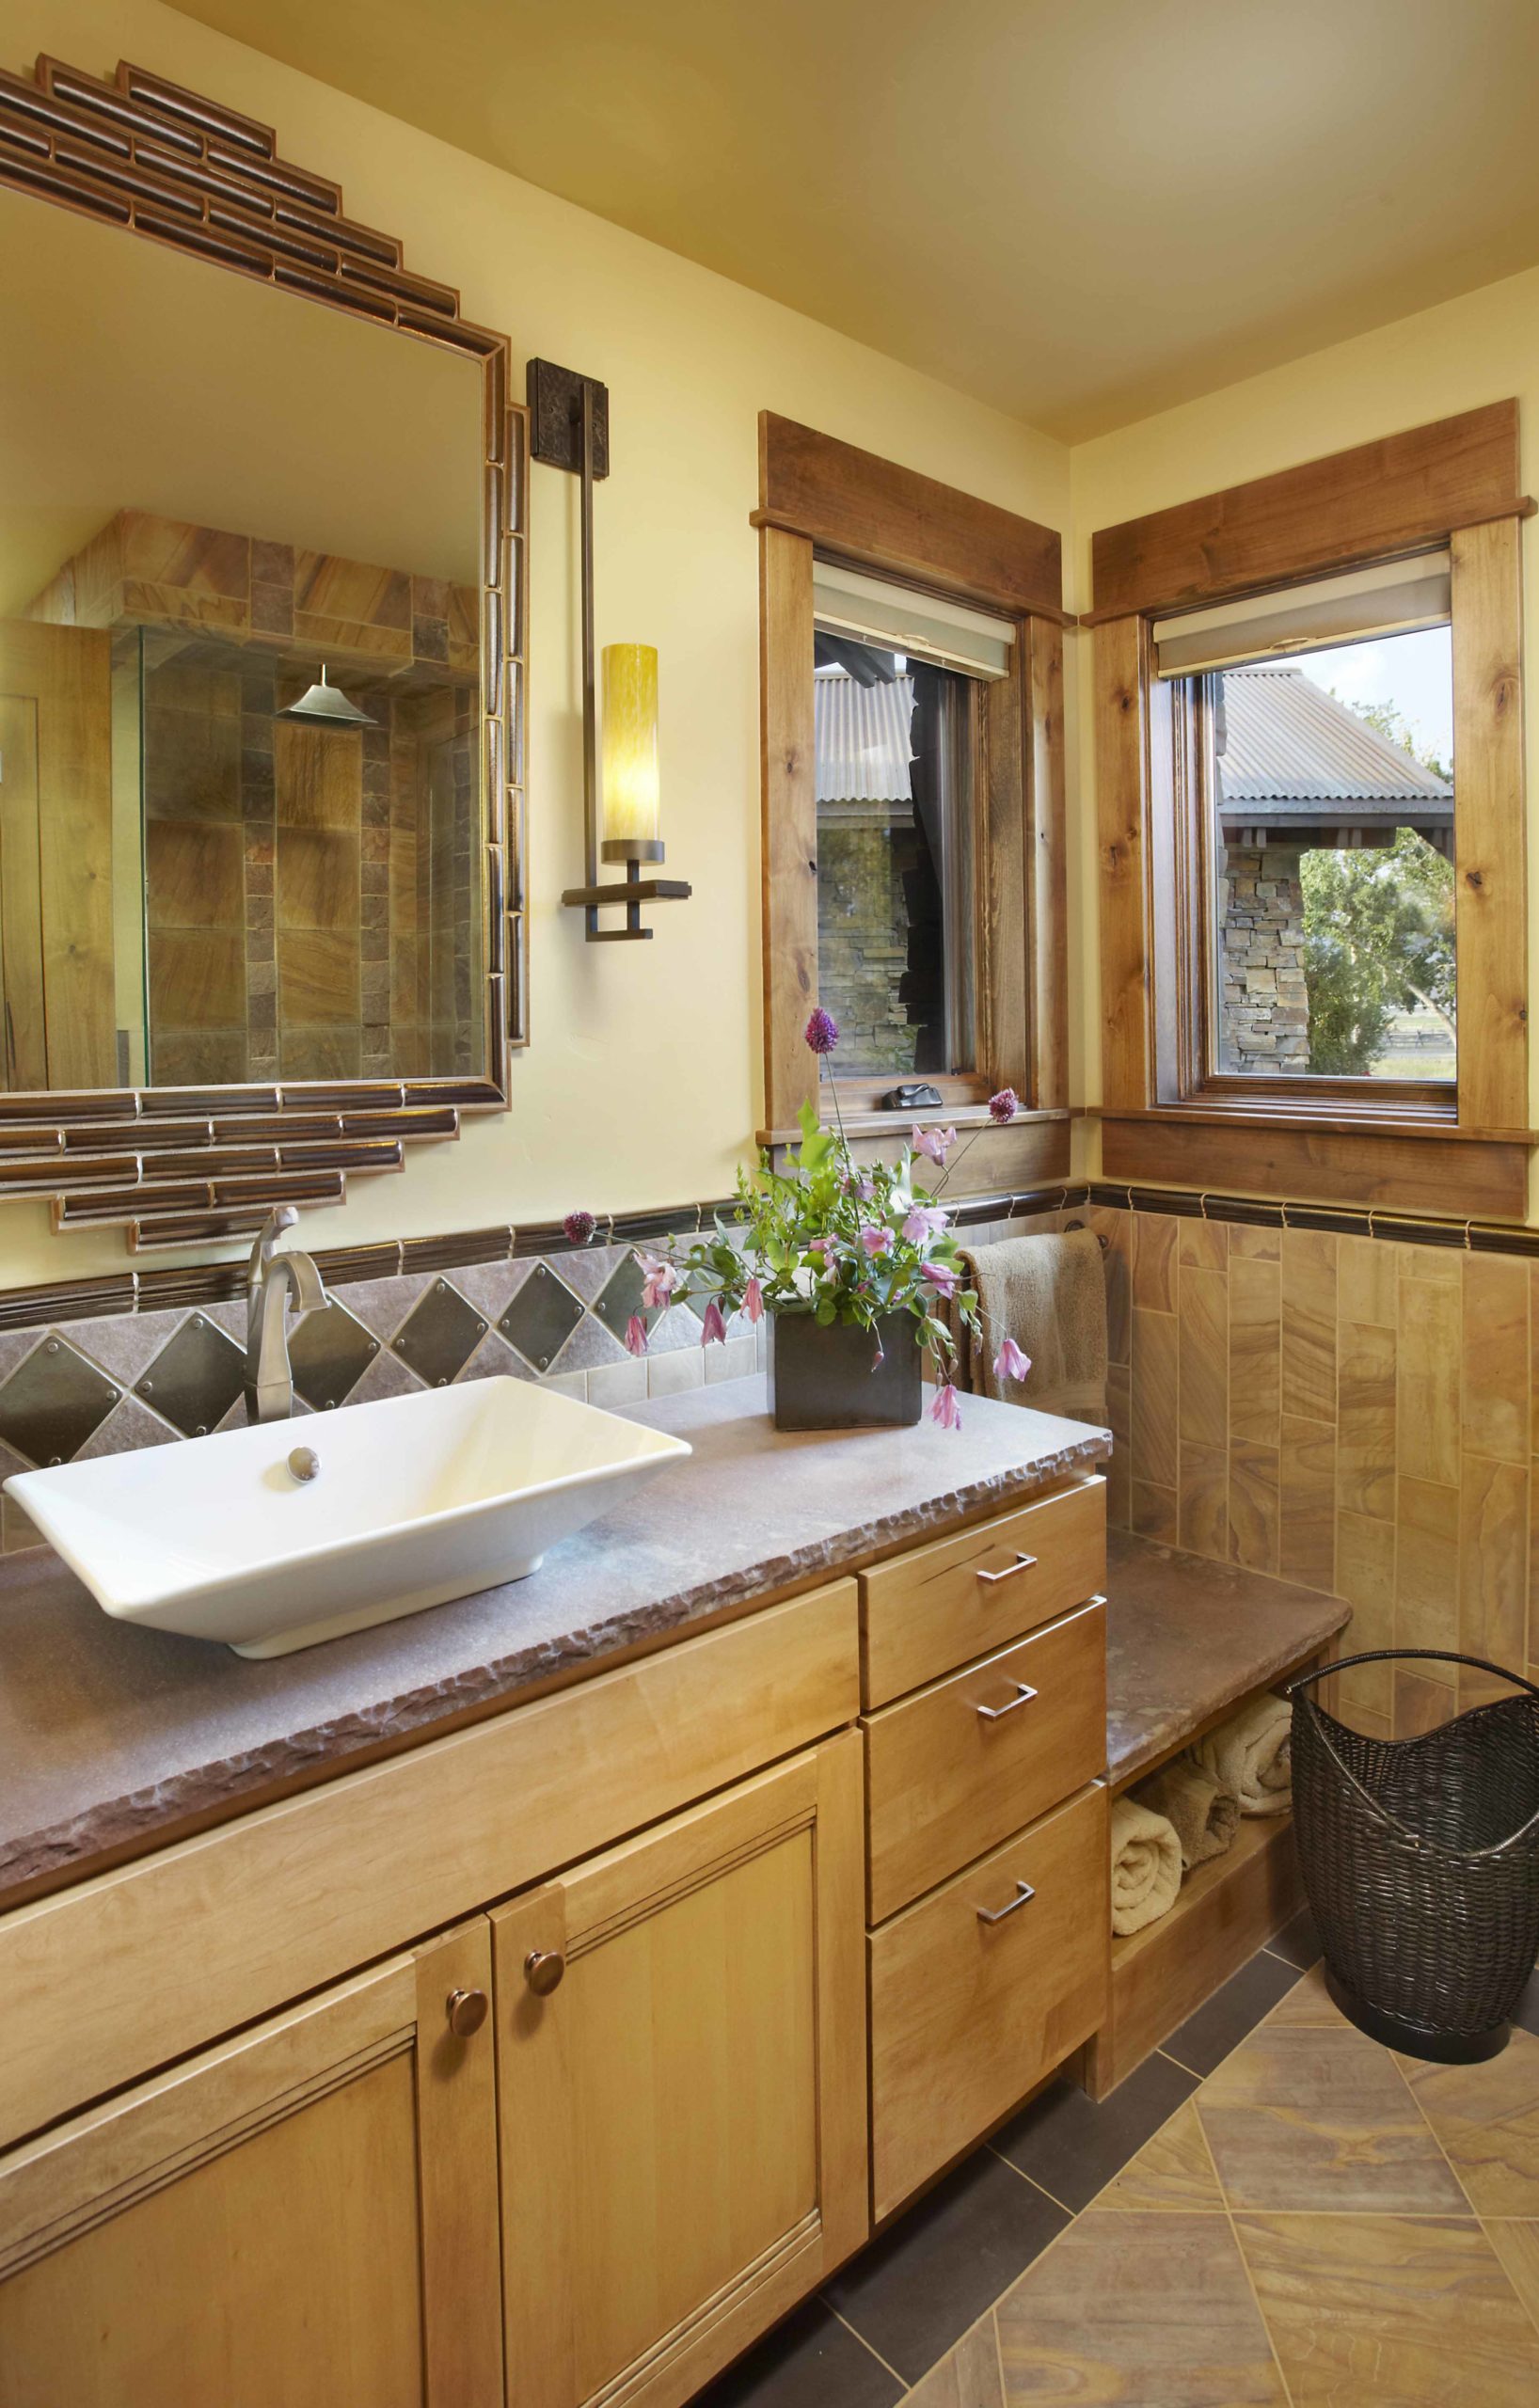 Bathroom with yellow walls and a light wooden vanity